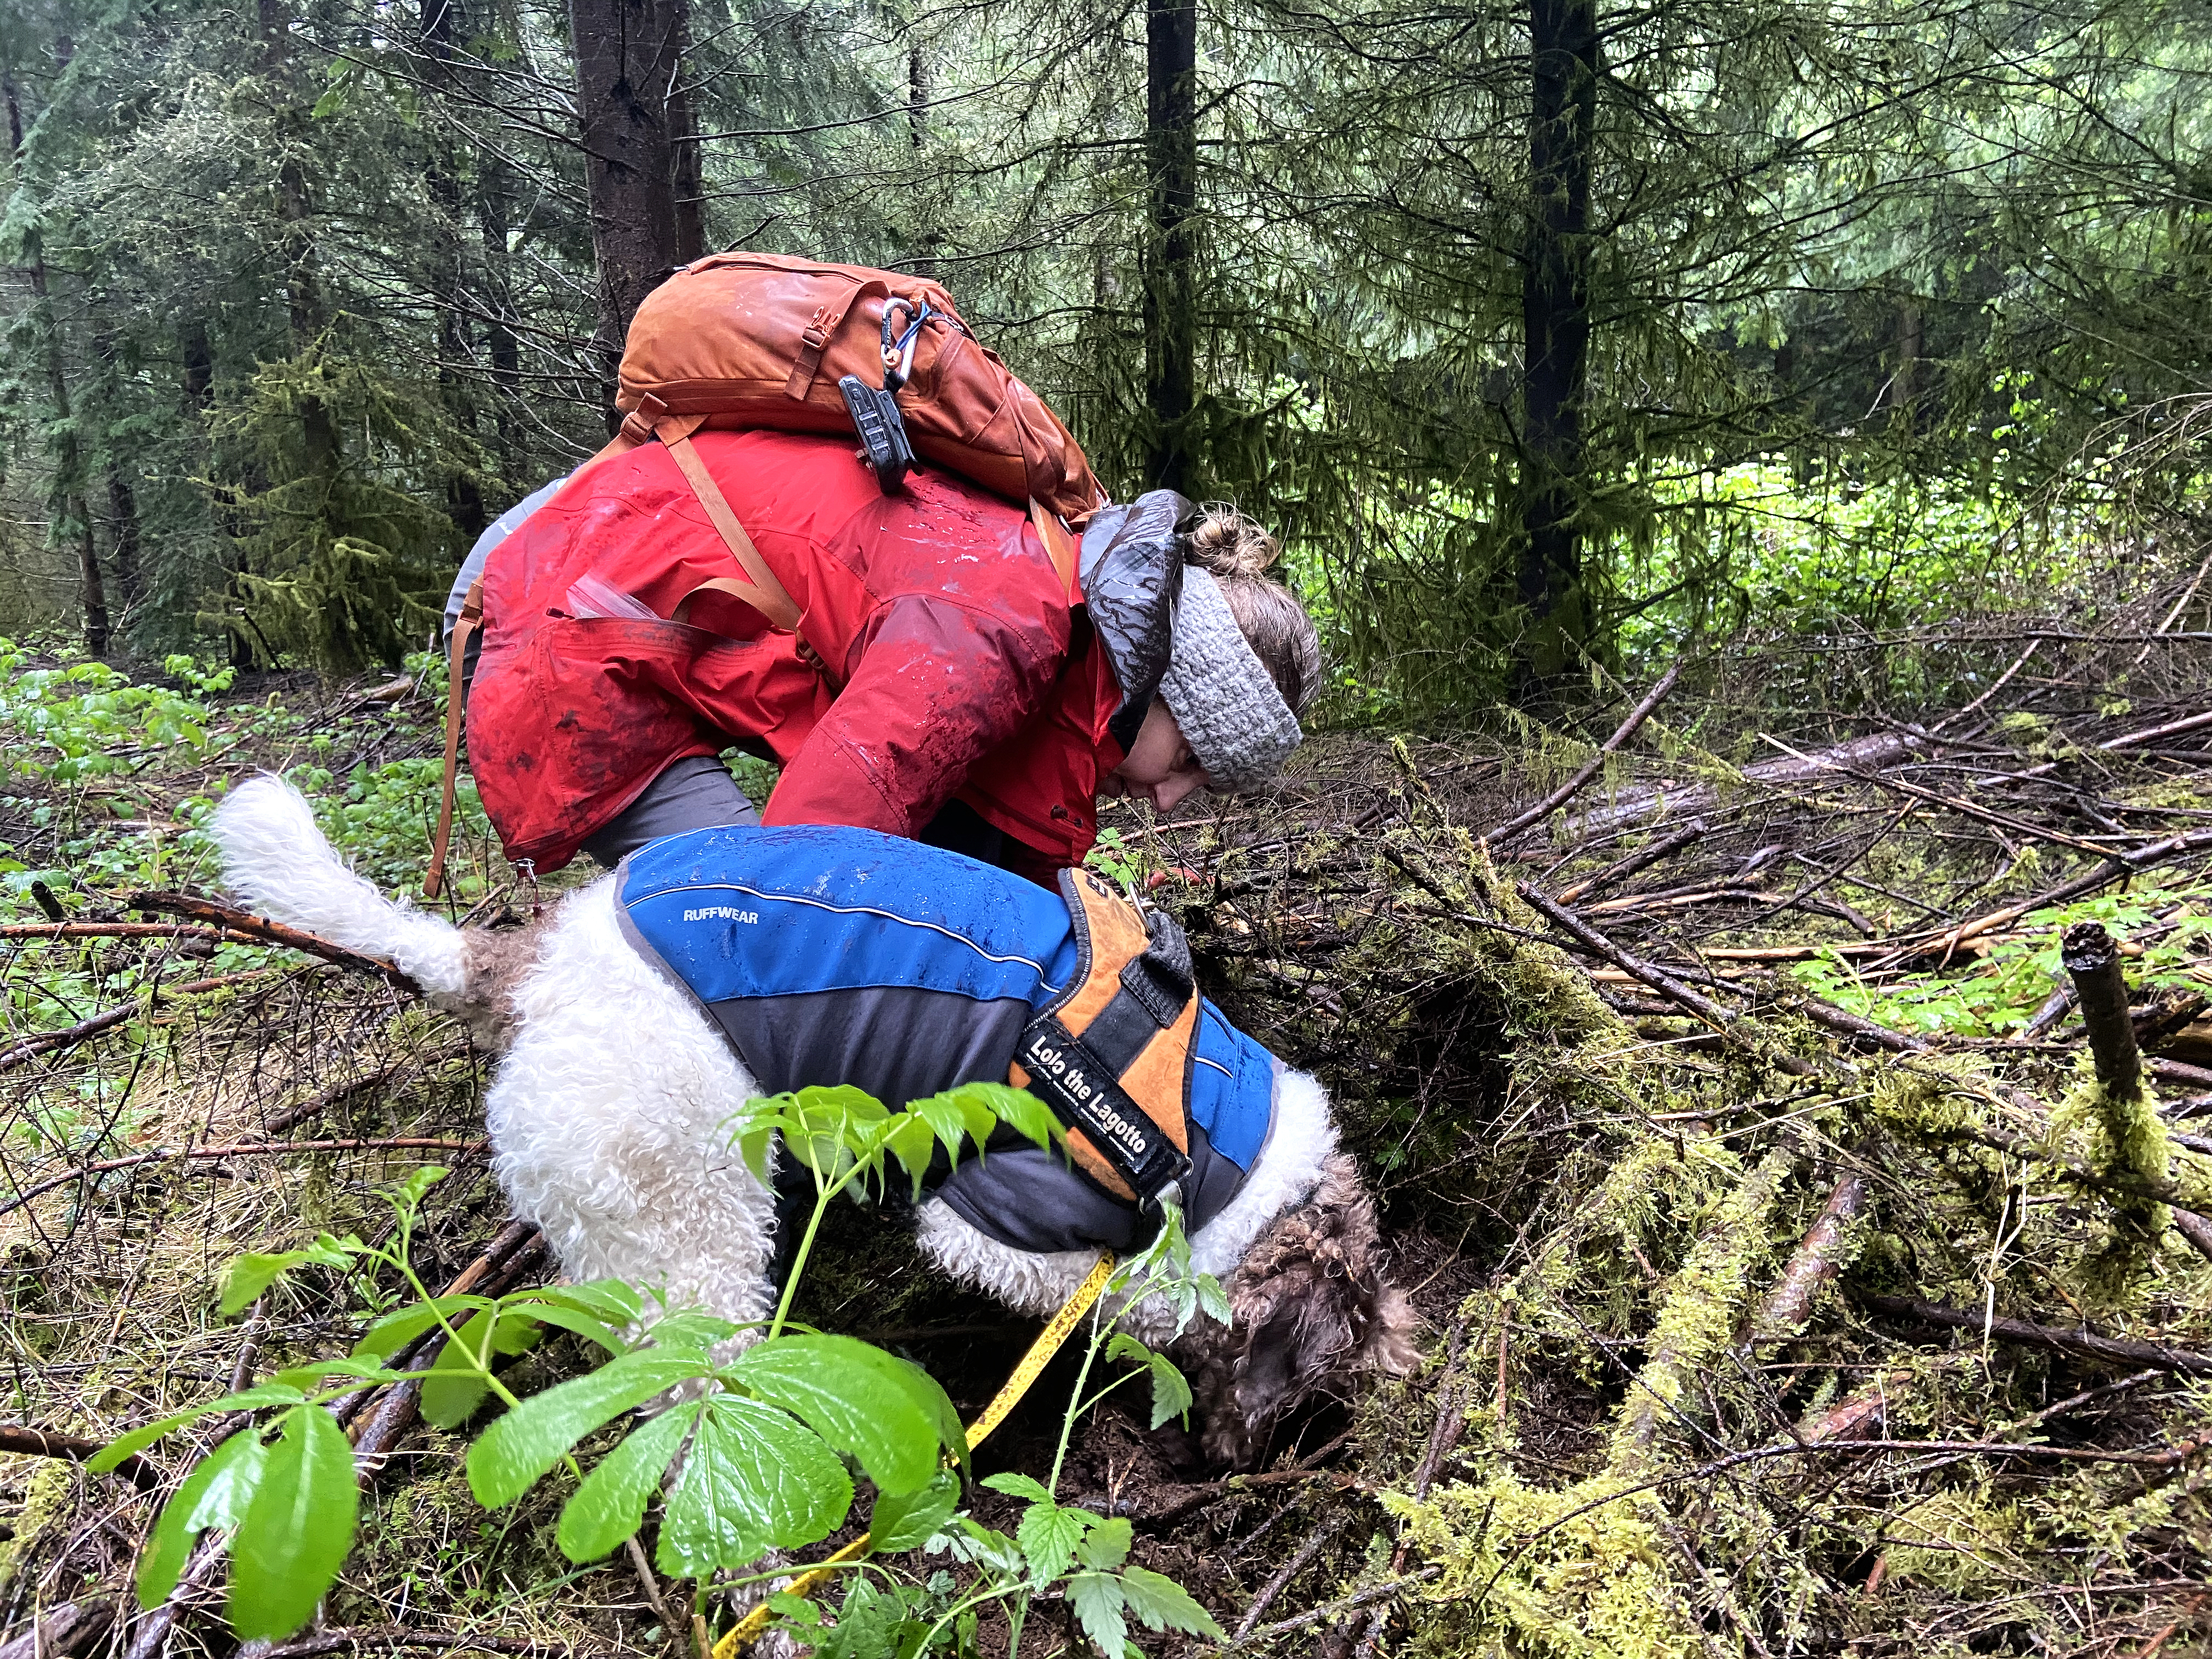 Sometimes Alana McGee has to help Lolo find truffles buried under sticks and logs. McGee always repacks the dirt after they find a truffle. CREDIT: Courtney Flatt/NWPB